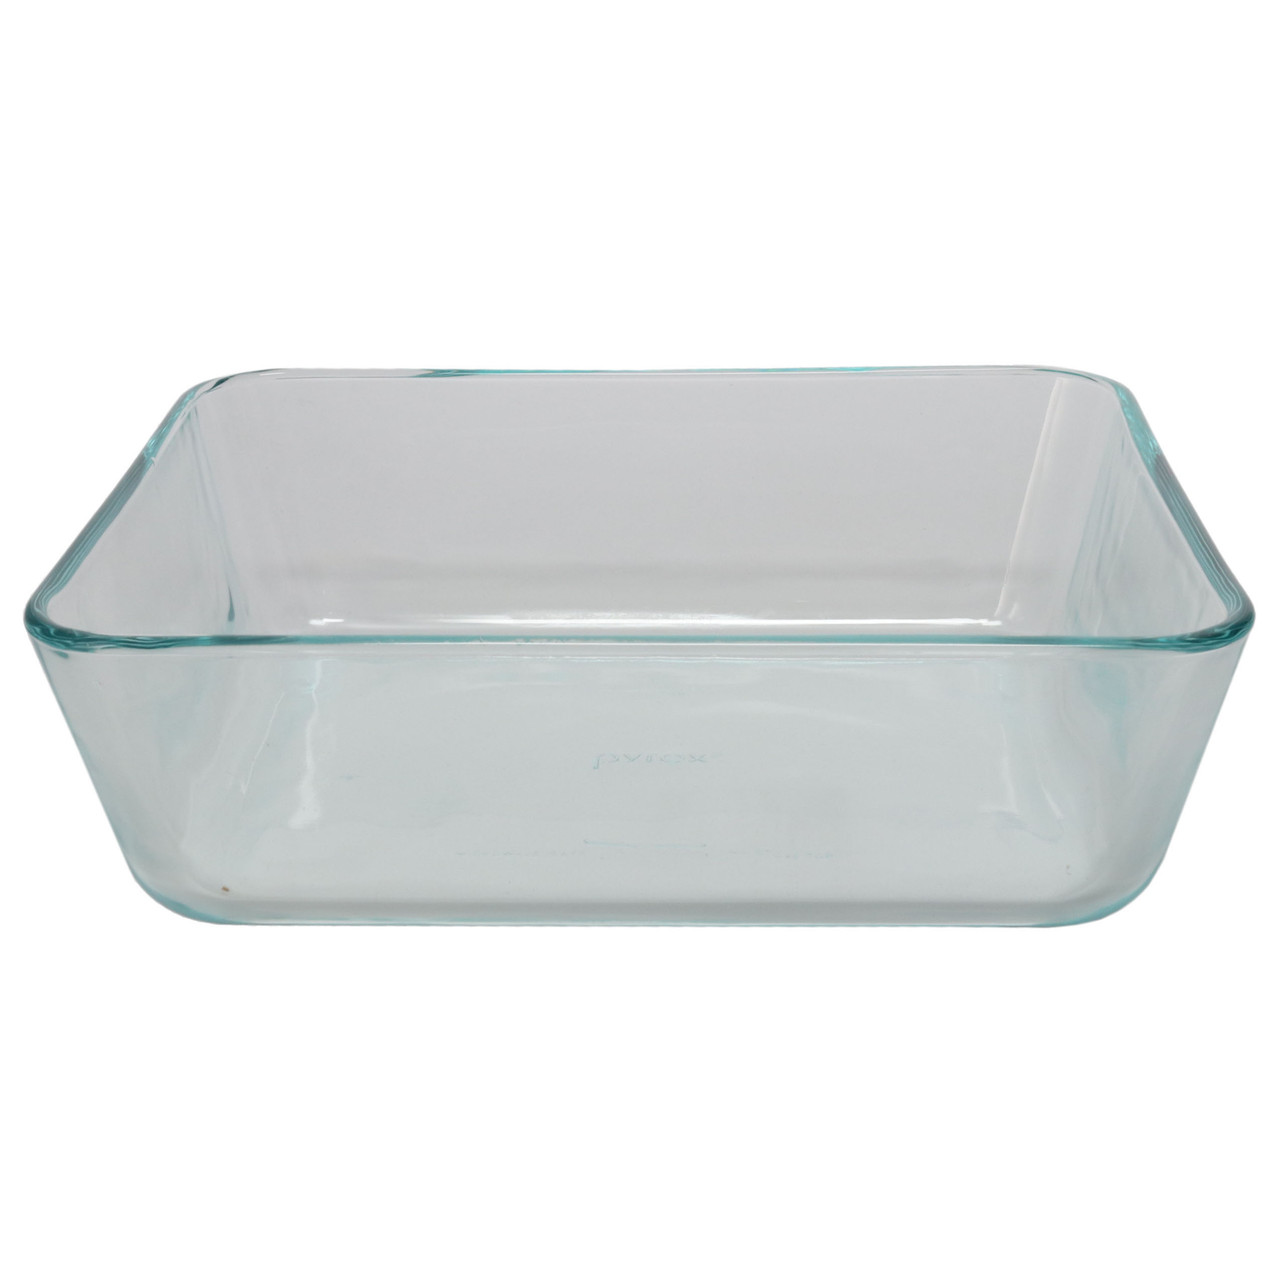 Pyrex Simply Store 3 Cup Glass Storage Dish 